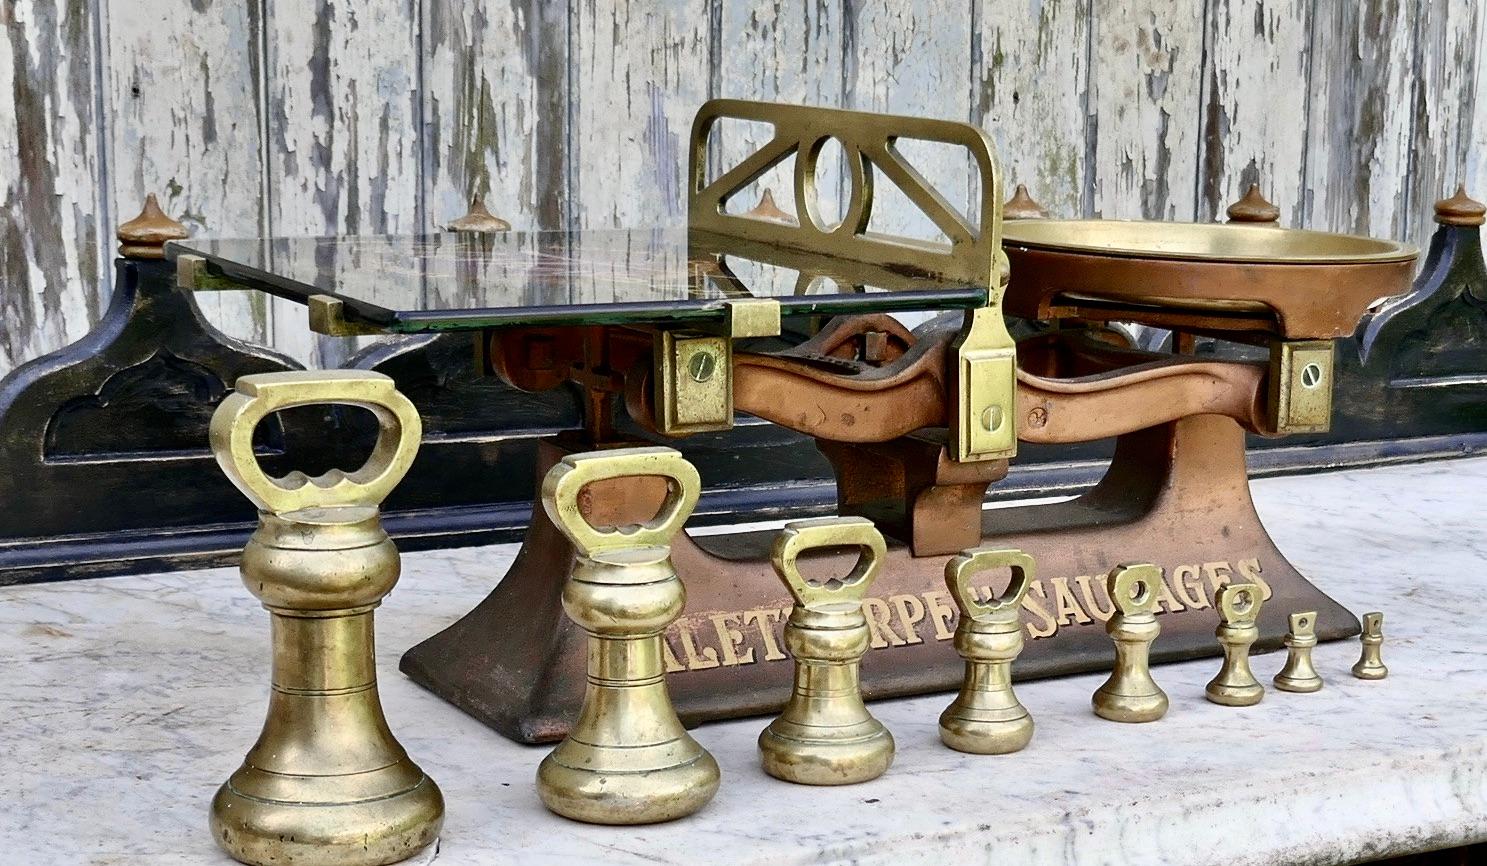 Butchers Balance Scales, Advertising Palethorpes’ Sausages 

Palethorpes’ Sausage Scales with Brass Bell Weights
The scale has a brass weight plate on one side and a square ceramic platter on the other, showing the classic Palethorpes’ Royal